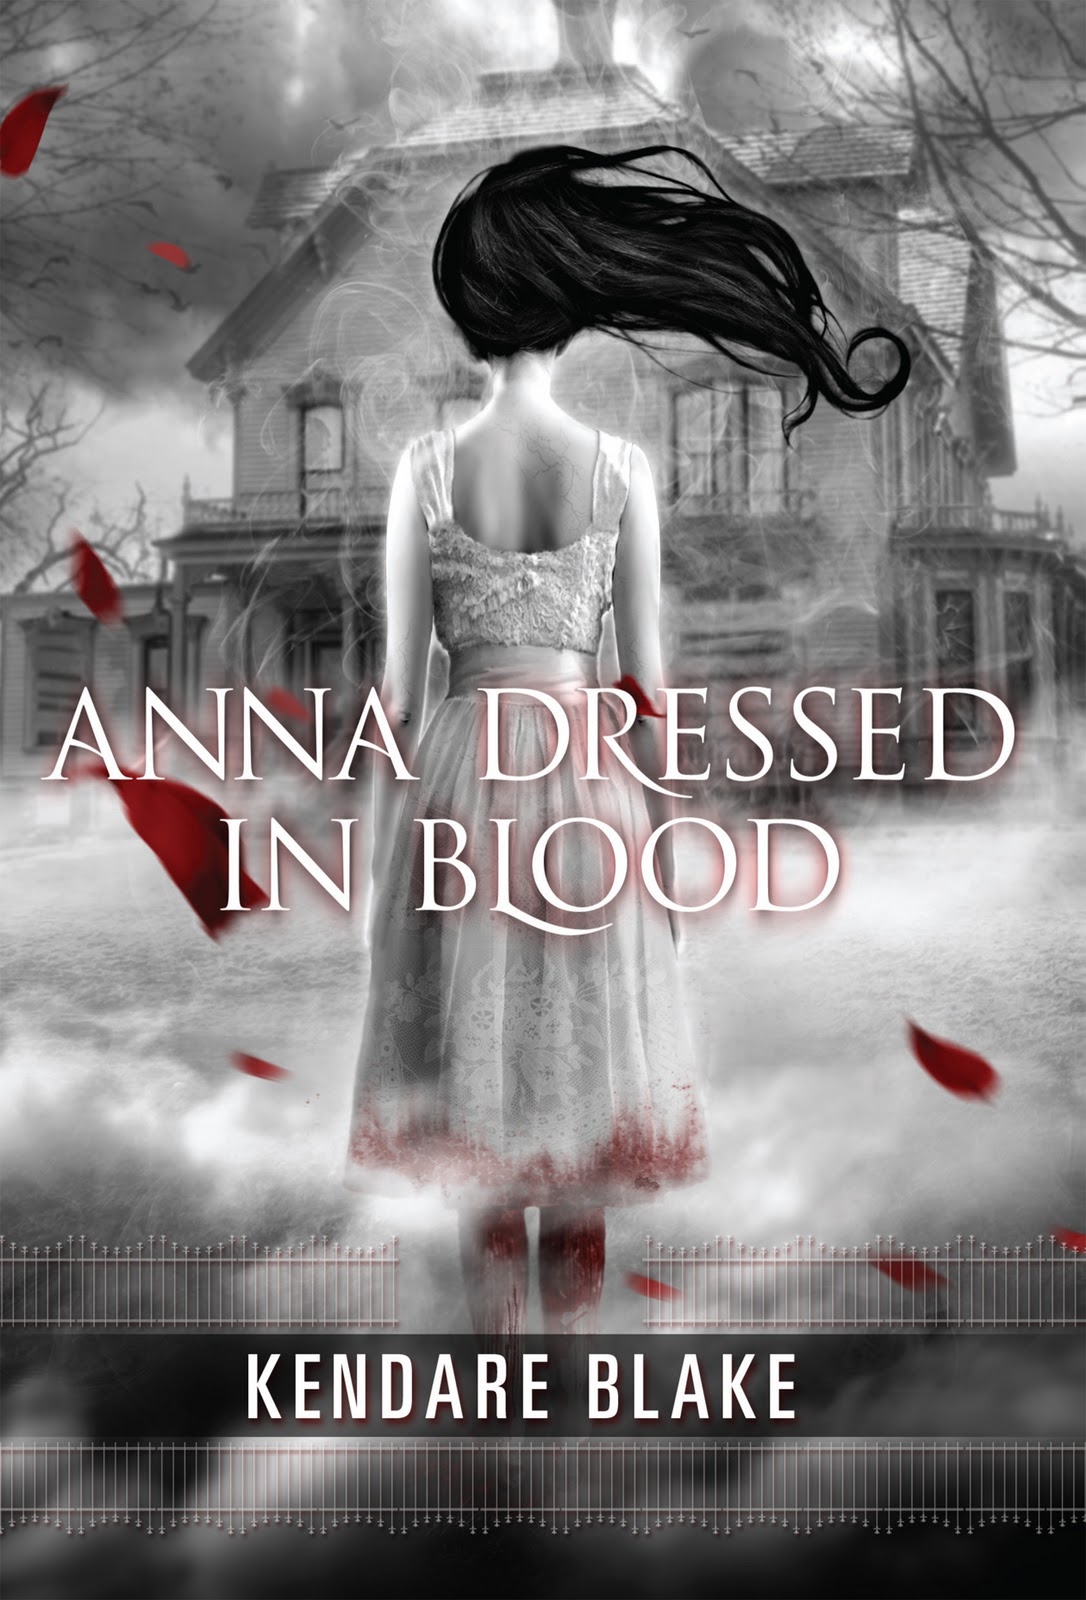 Fickle Fish Films Options Anna Dressed in Blood